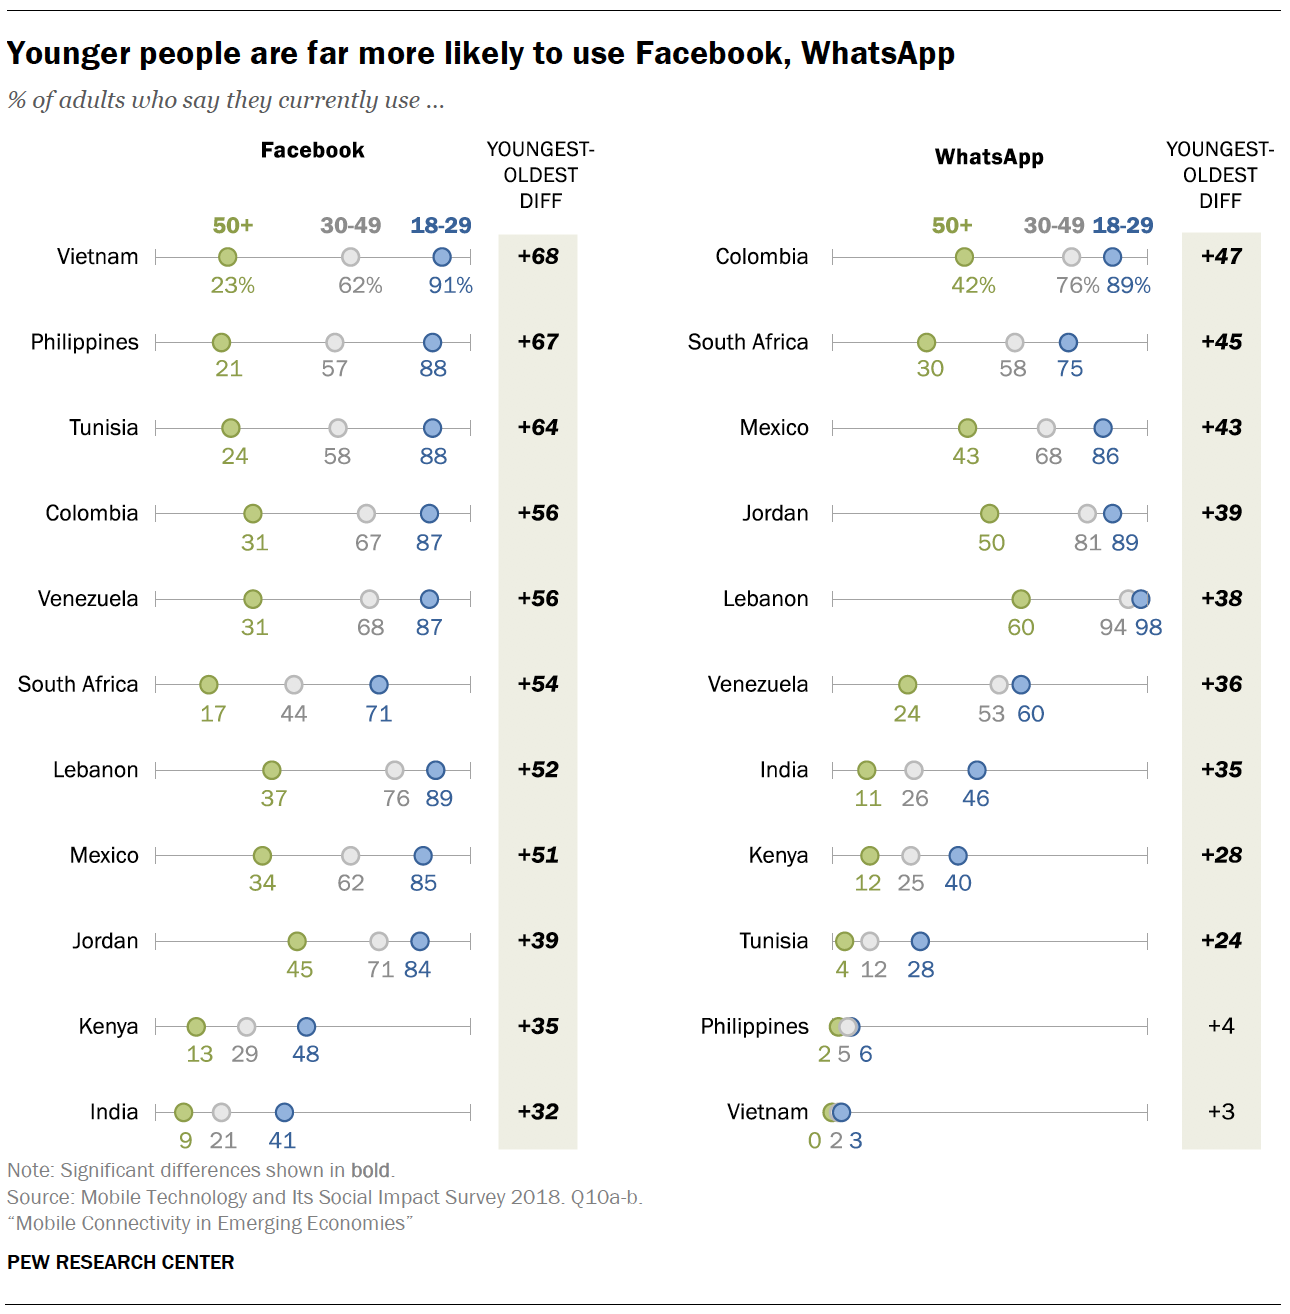 Younger people are far more likely to use Facebook, WhatsApp